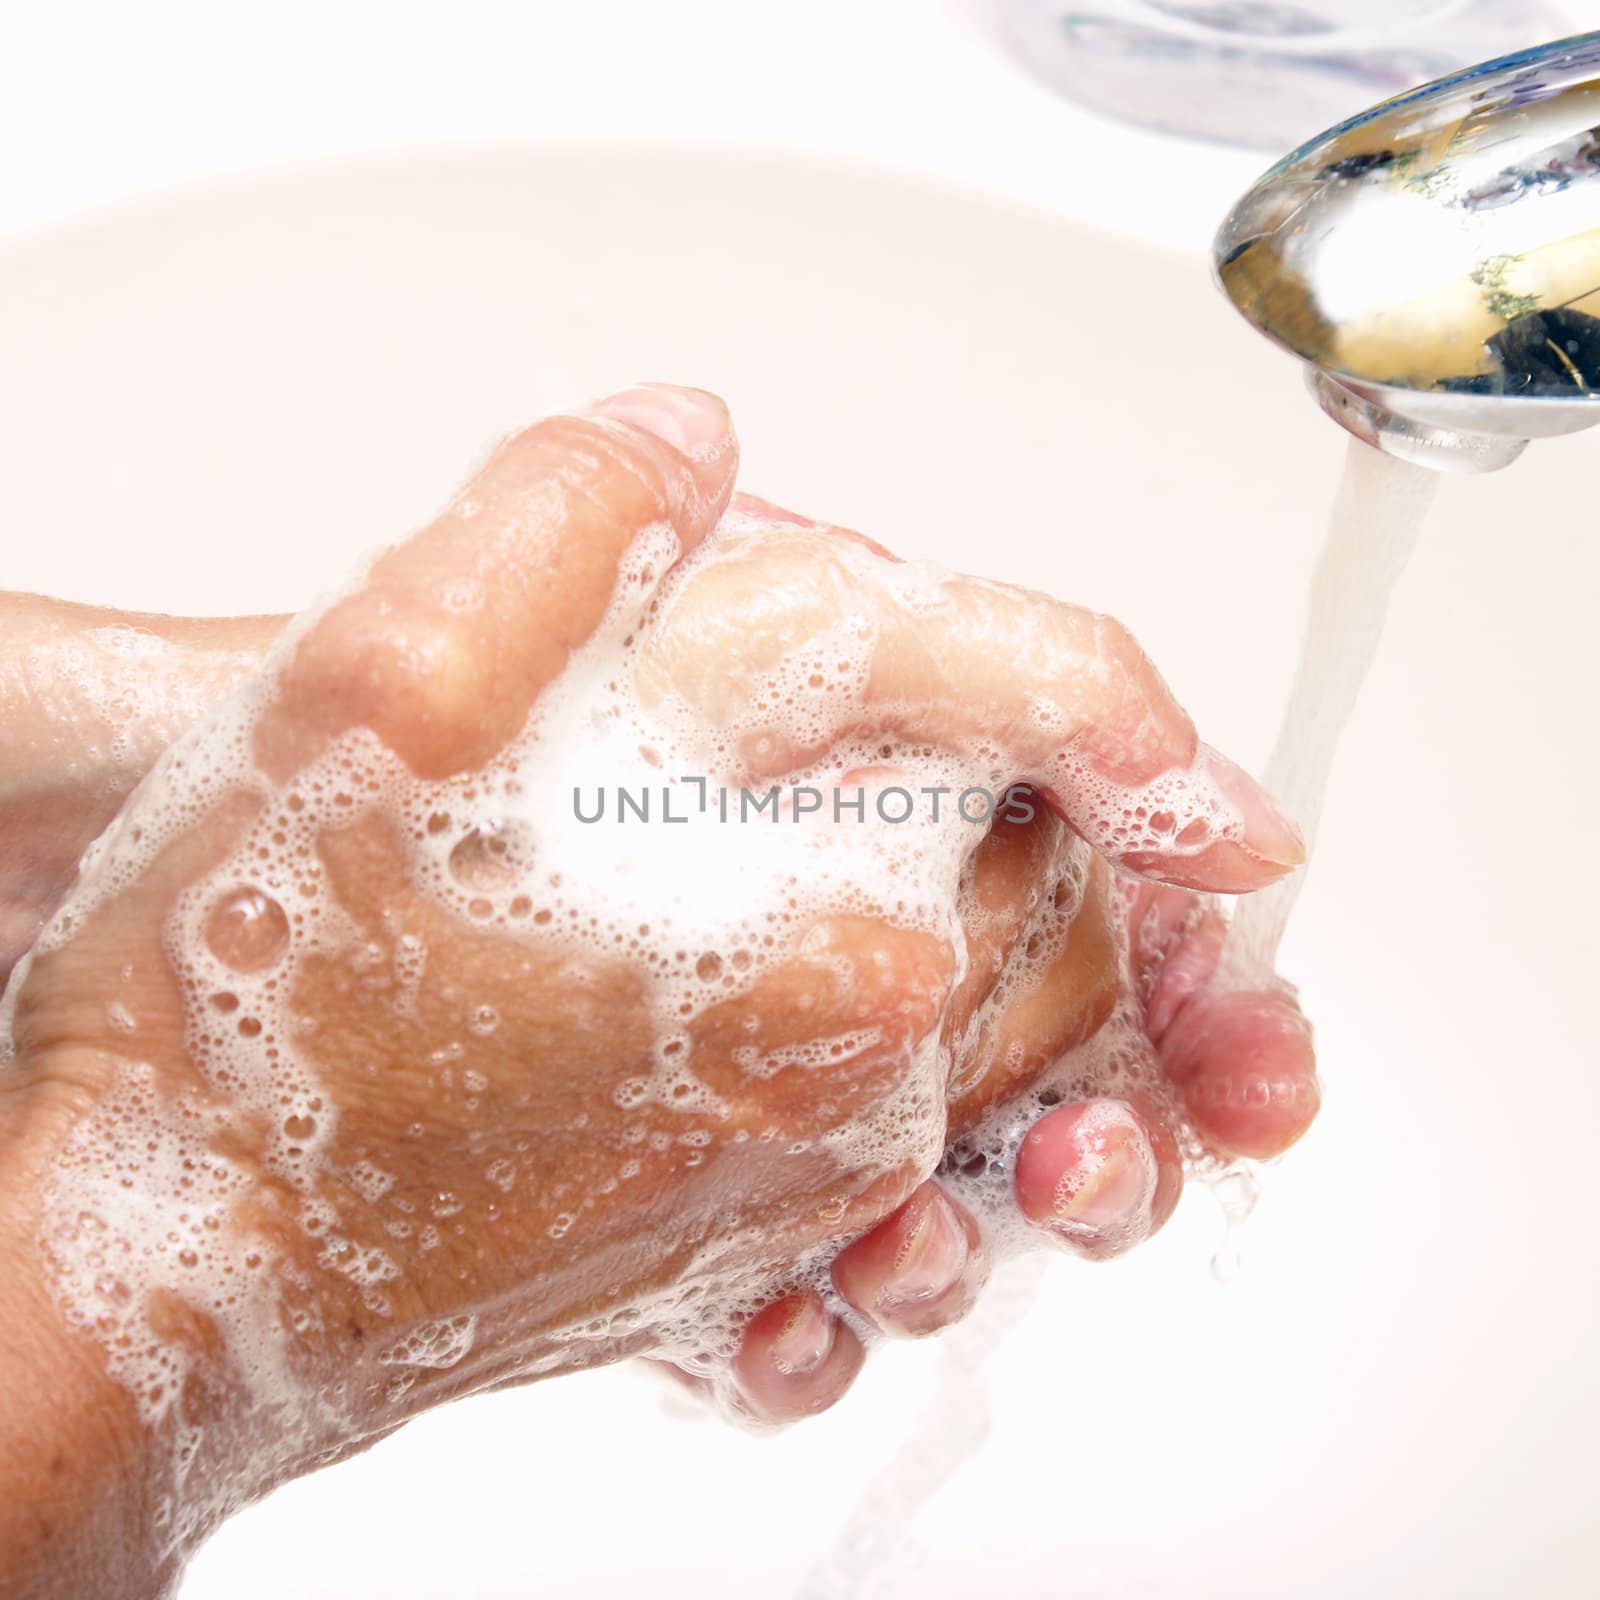 A woman washes her hands with soap and water.